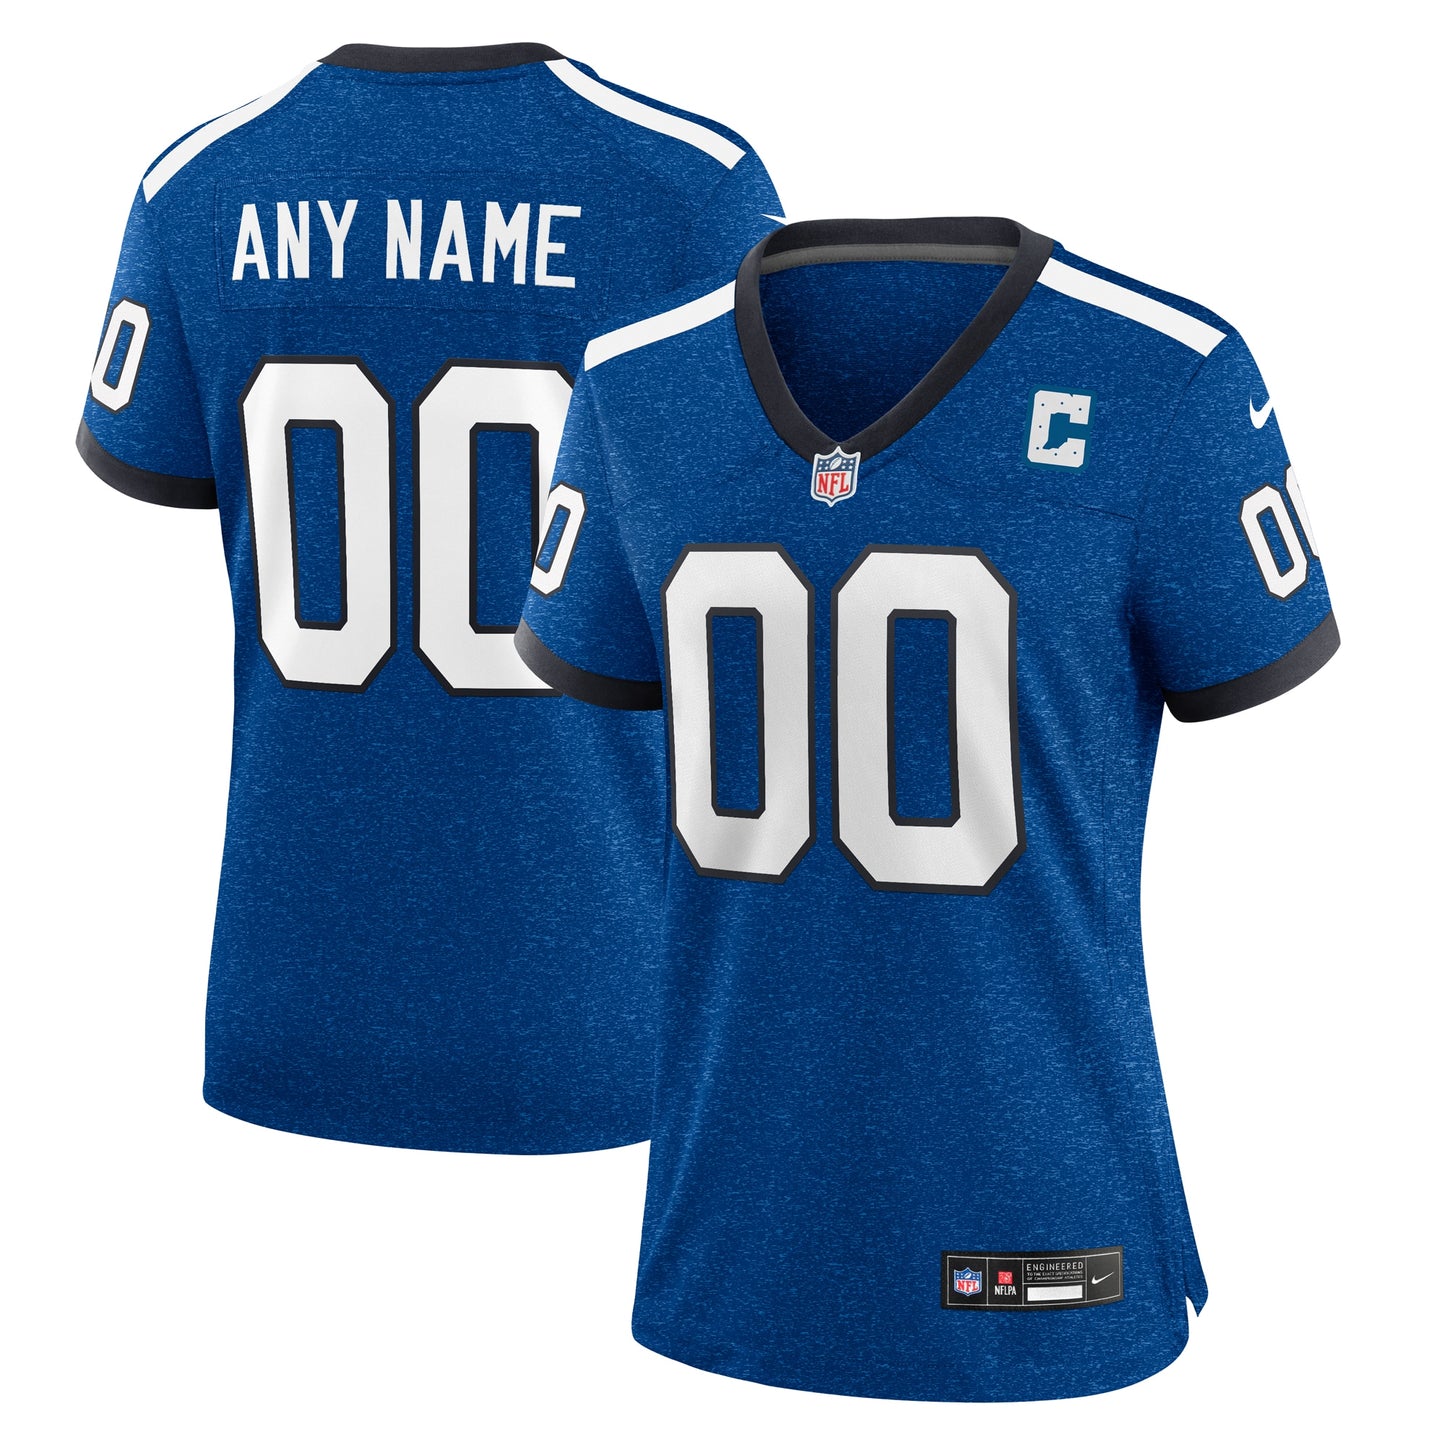 Indianapolis Colts Nike Women's Indiana Nights Alternate Custom Game Jersey - Royal